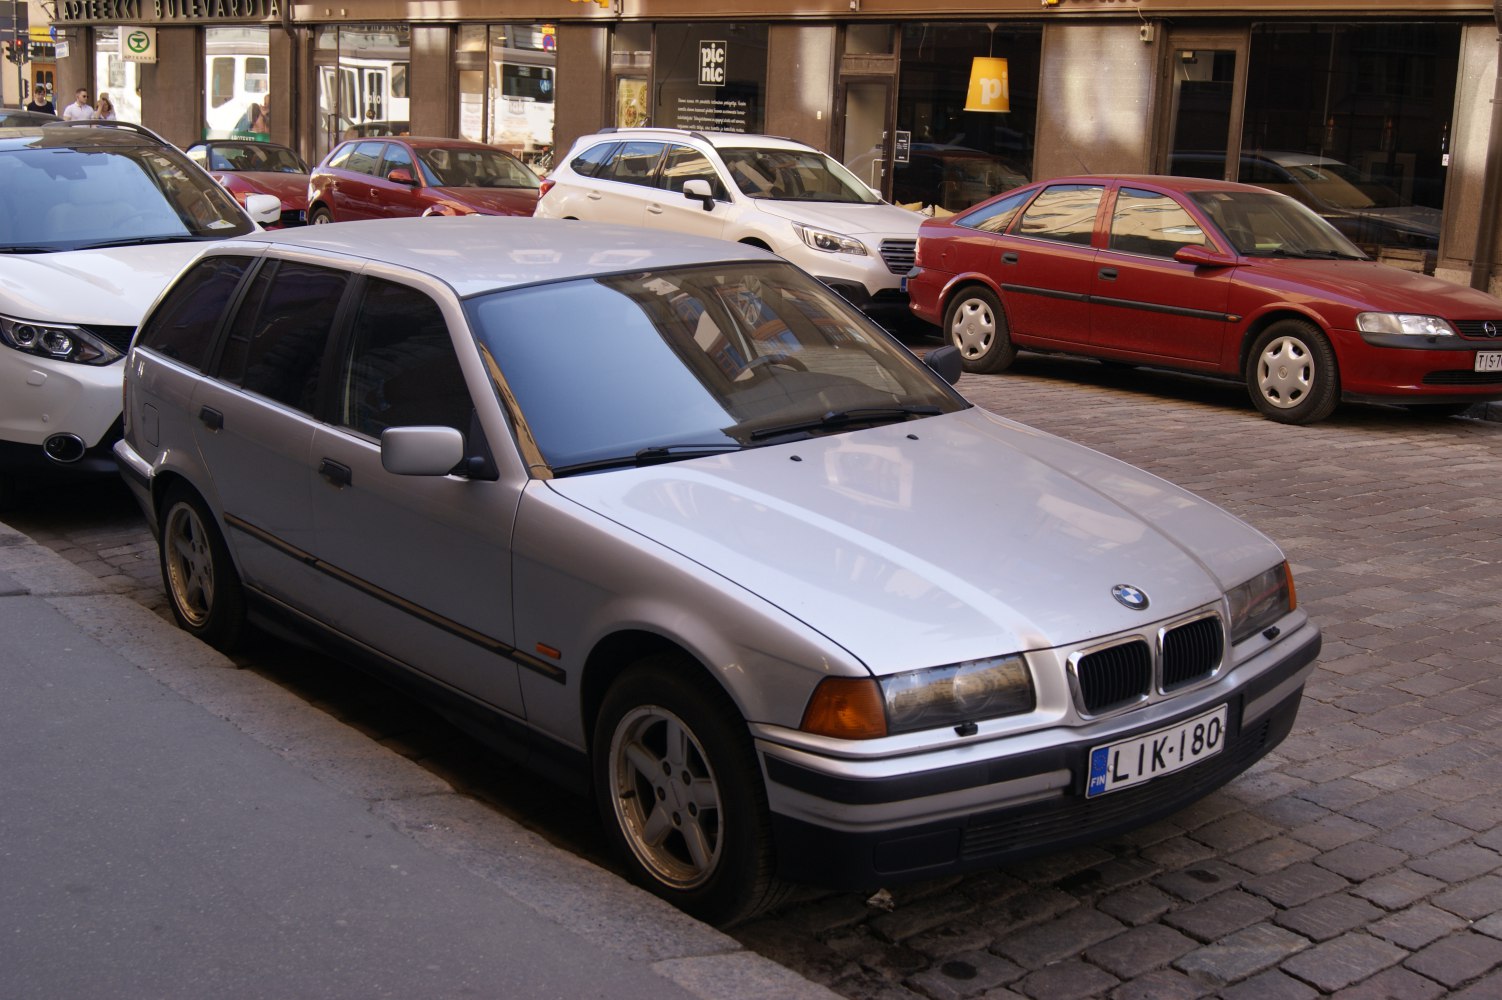 https://totalrenting.es/wp-content/uploads/2022/10/bmw-serie-3-touring-e36-1994-316i-102-cv-ranchera.png